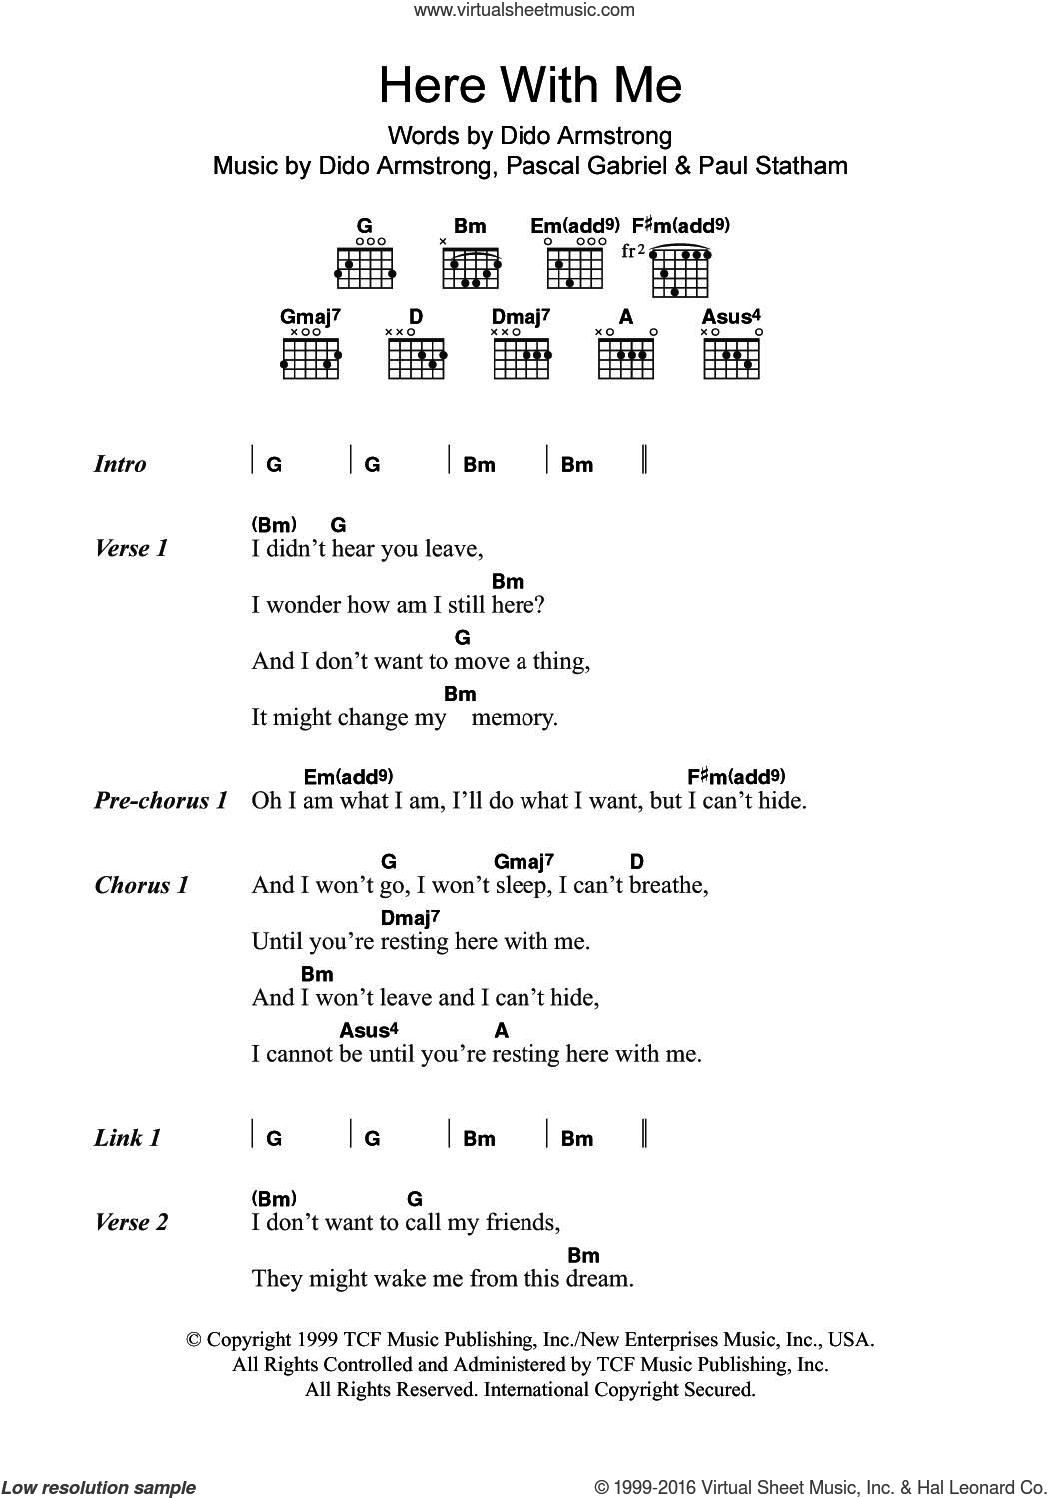 Download & Print Here With Me (Theme from Roswell) for guitar (chords) ...